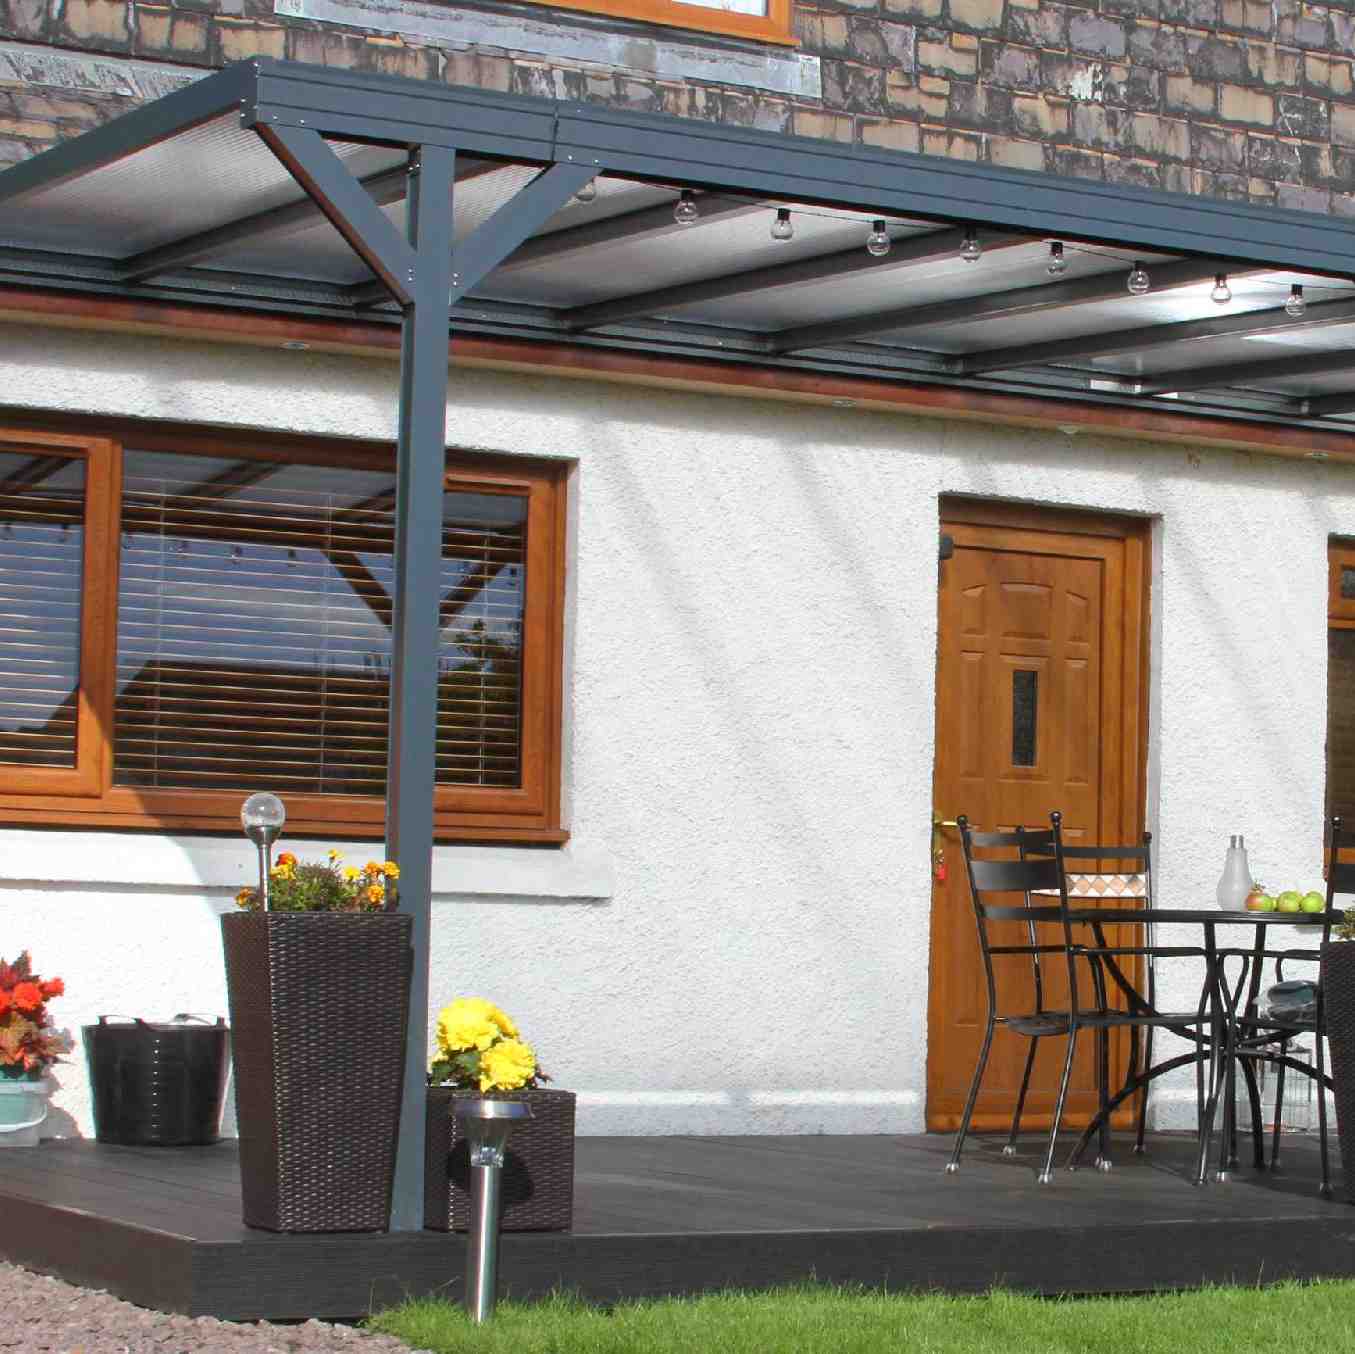 Omega Verandah, Anthracite Grey, 16mm Polycarbonate Glazing - 7.0m (W) x 4.5m (P), (4) Supporting Posts